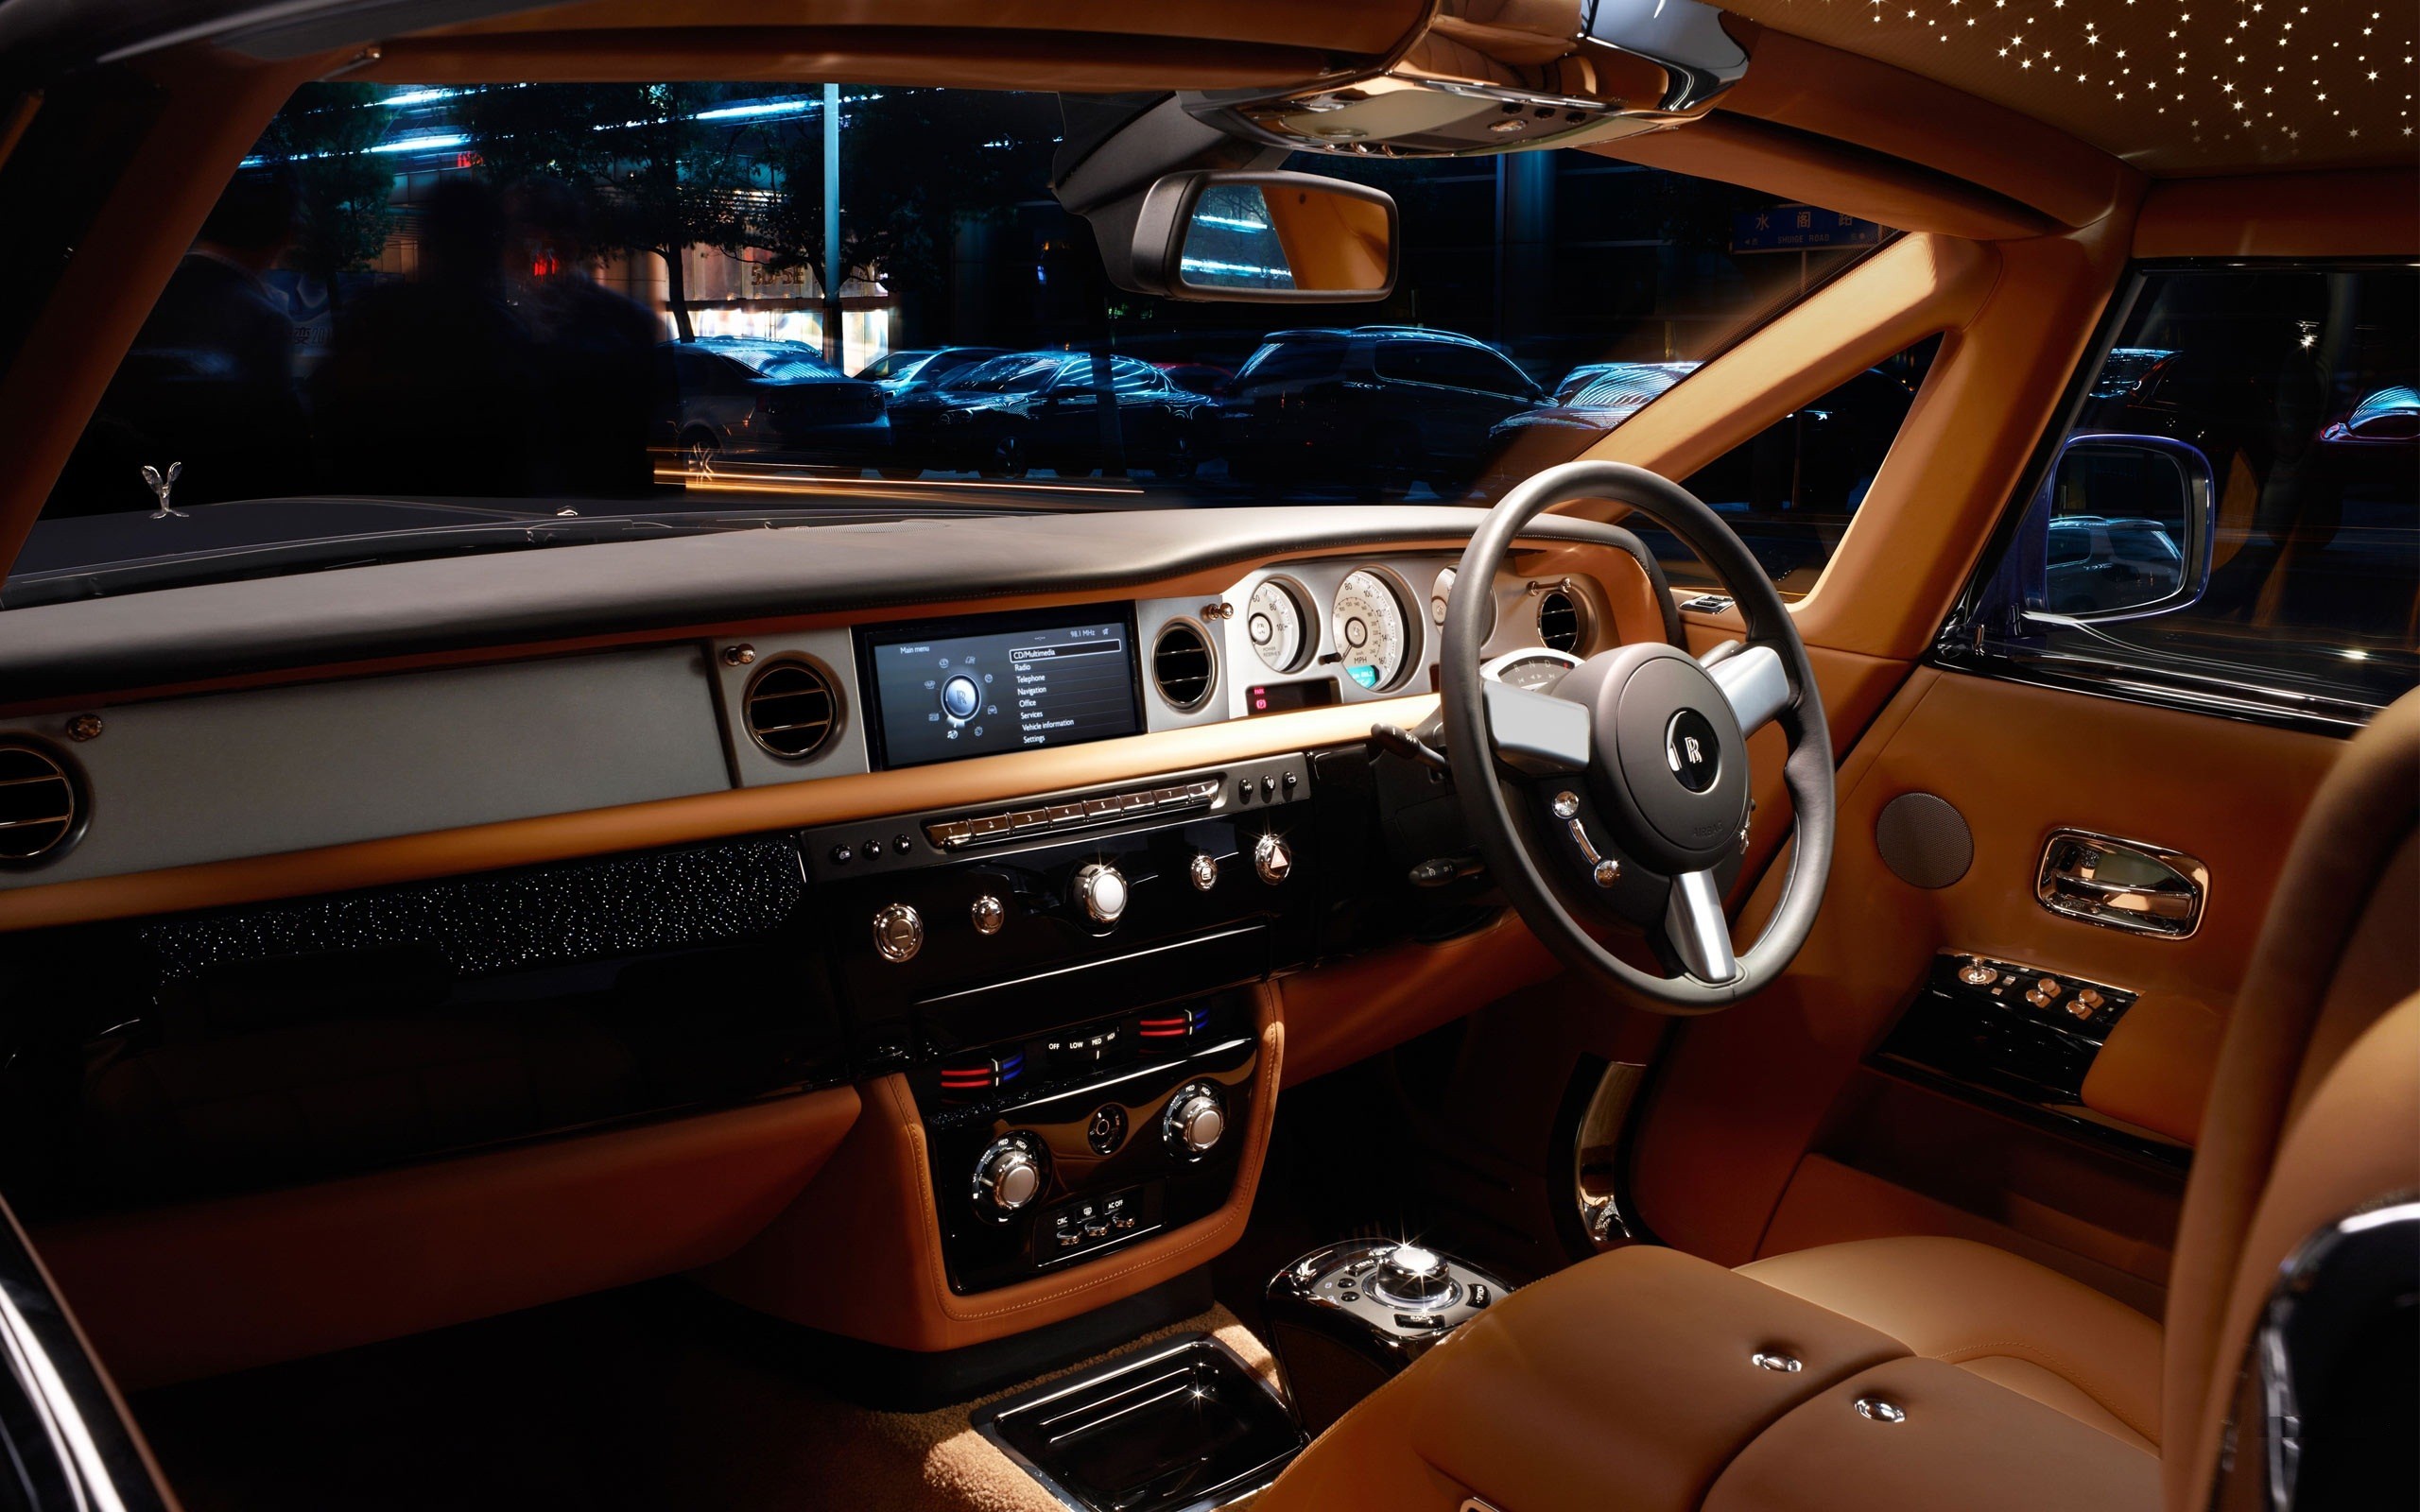 Rolls Royce Phantom Cityscapes Coupe Dashboards Wallpaper